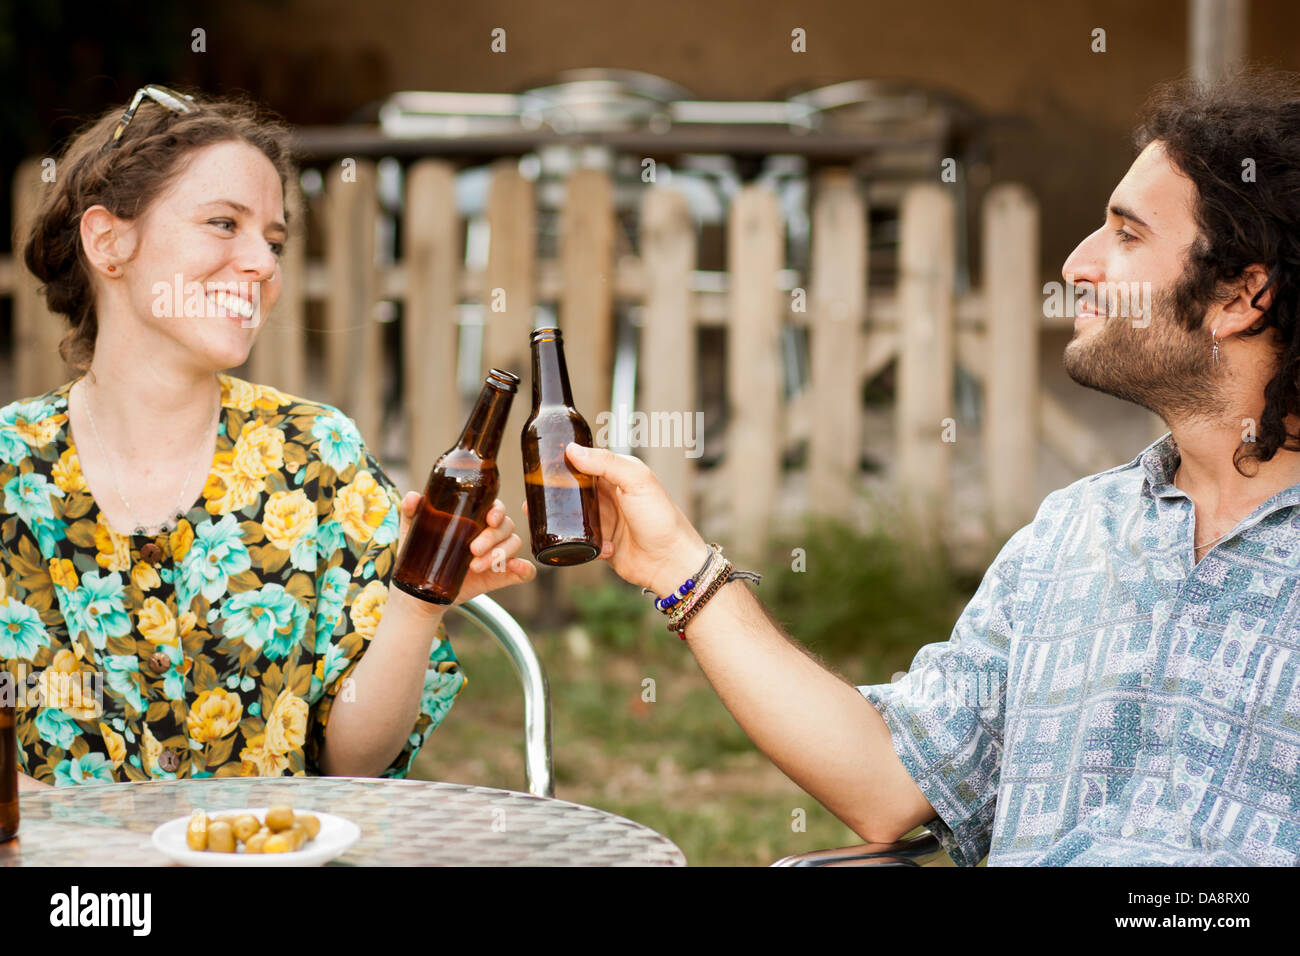 Couple of friends making a toast in a terrace outdoors Stock Photo